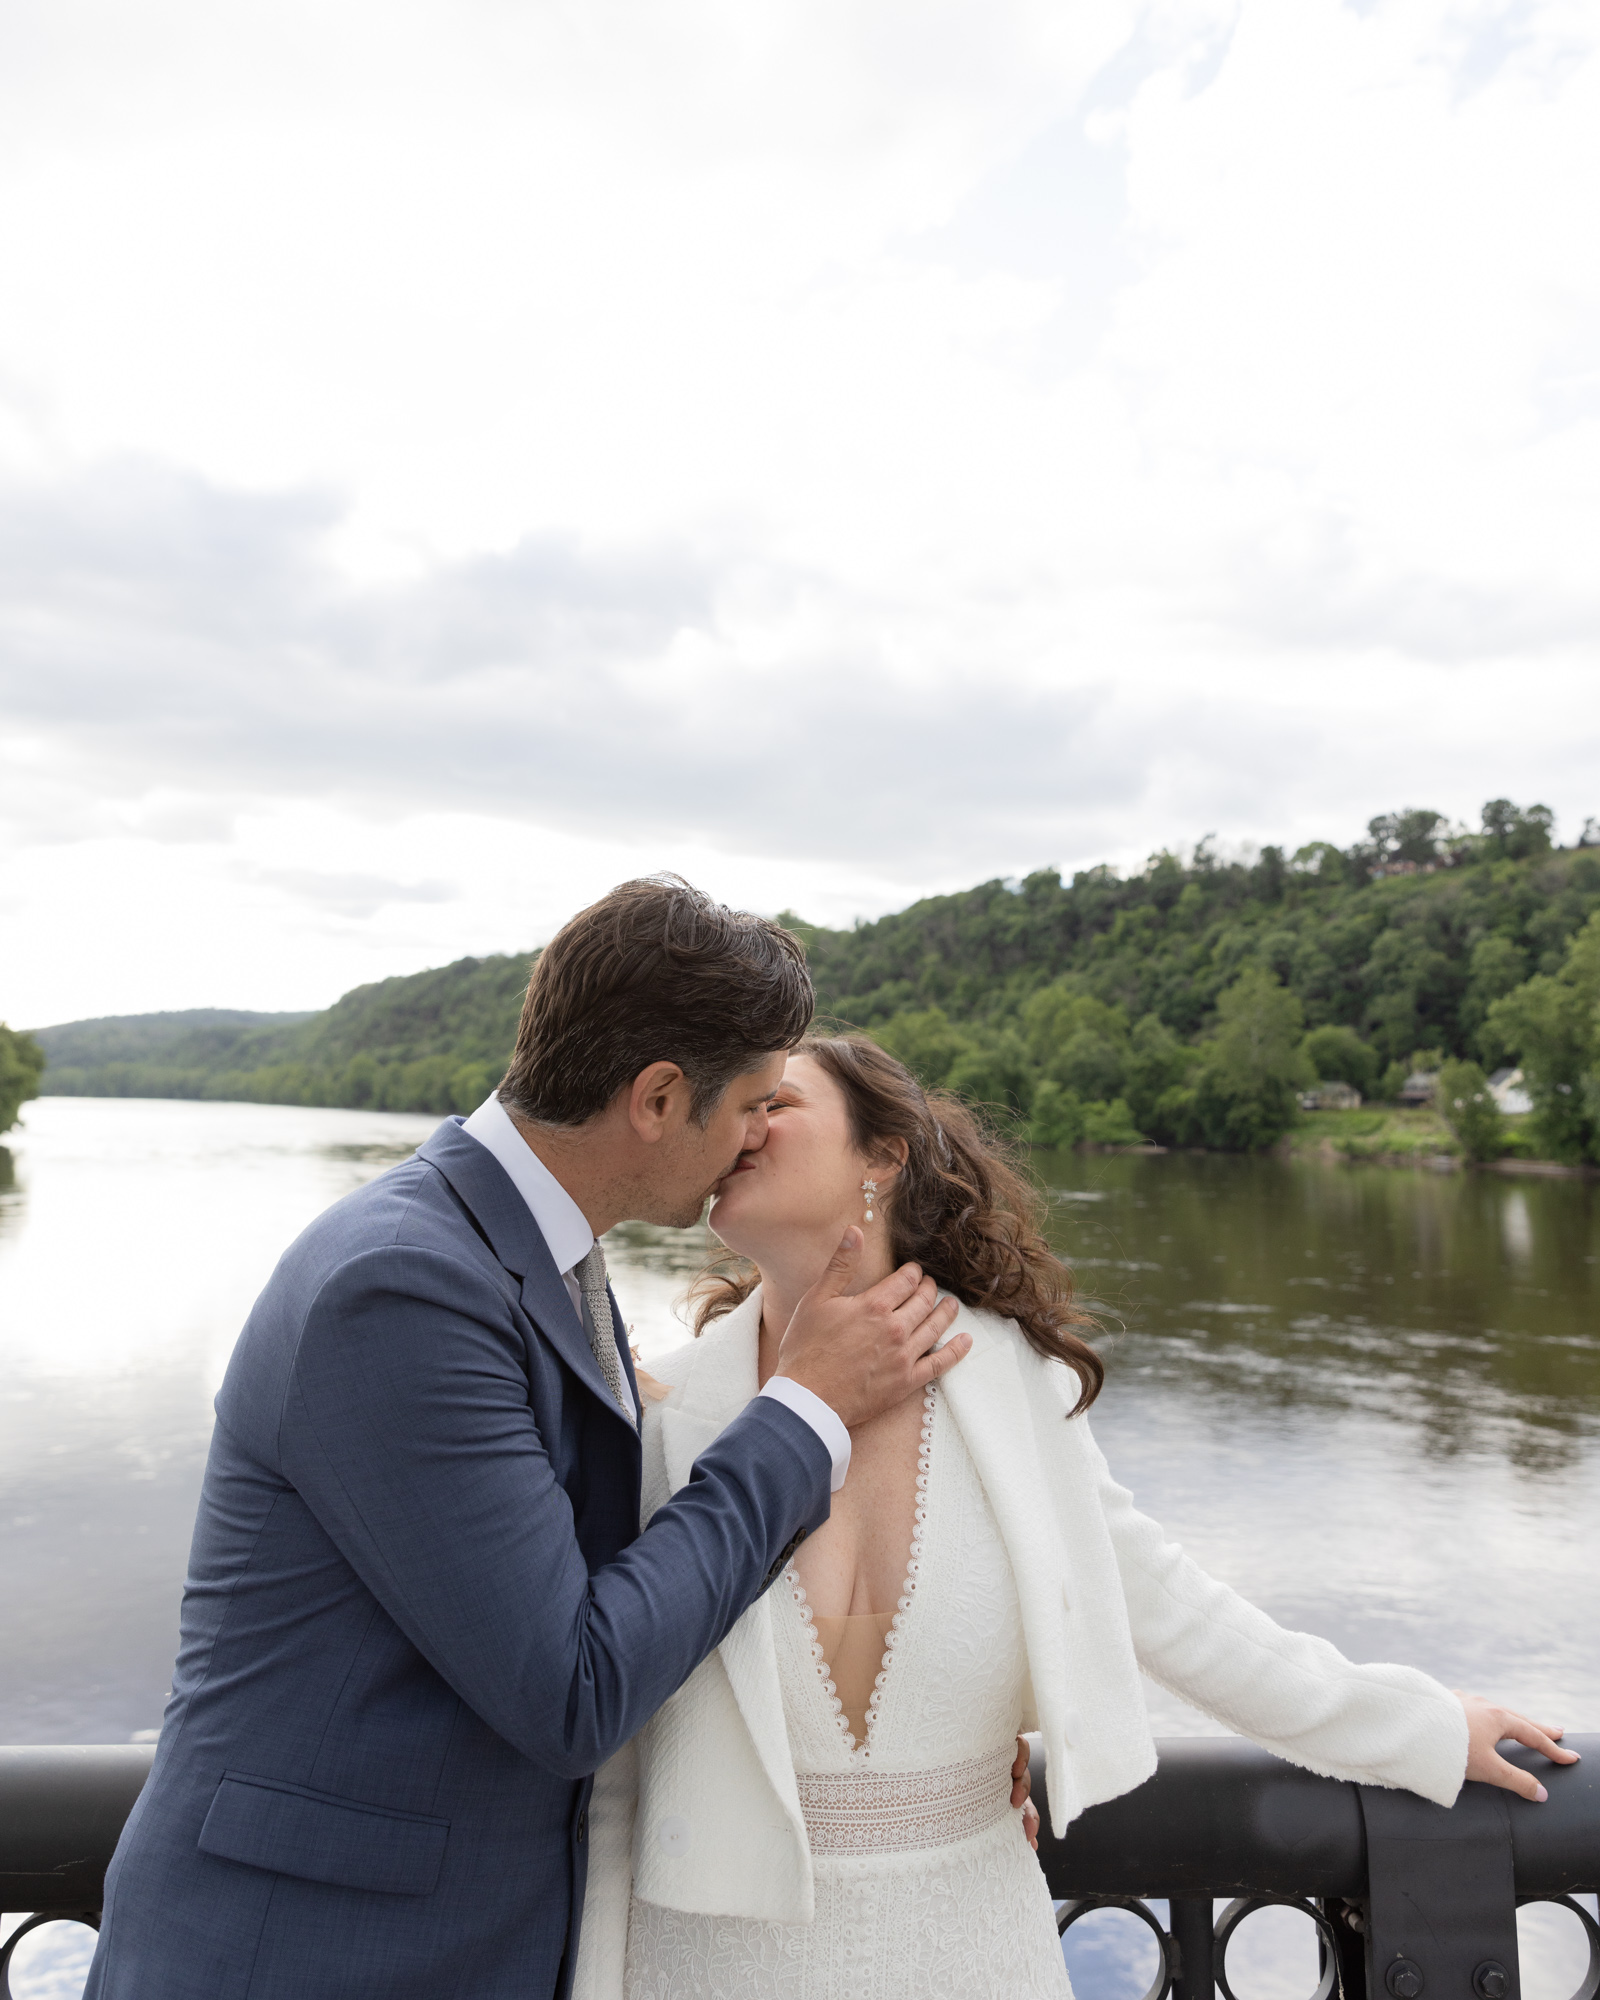 Elegant bride and groom share a romantic kiss on the Milford Bridge in Bucks County, PA